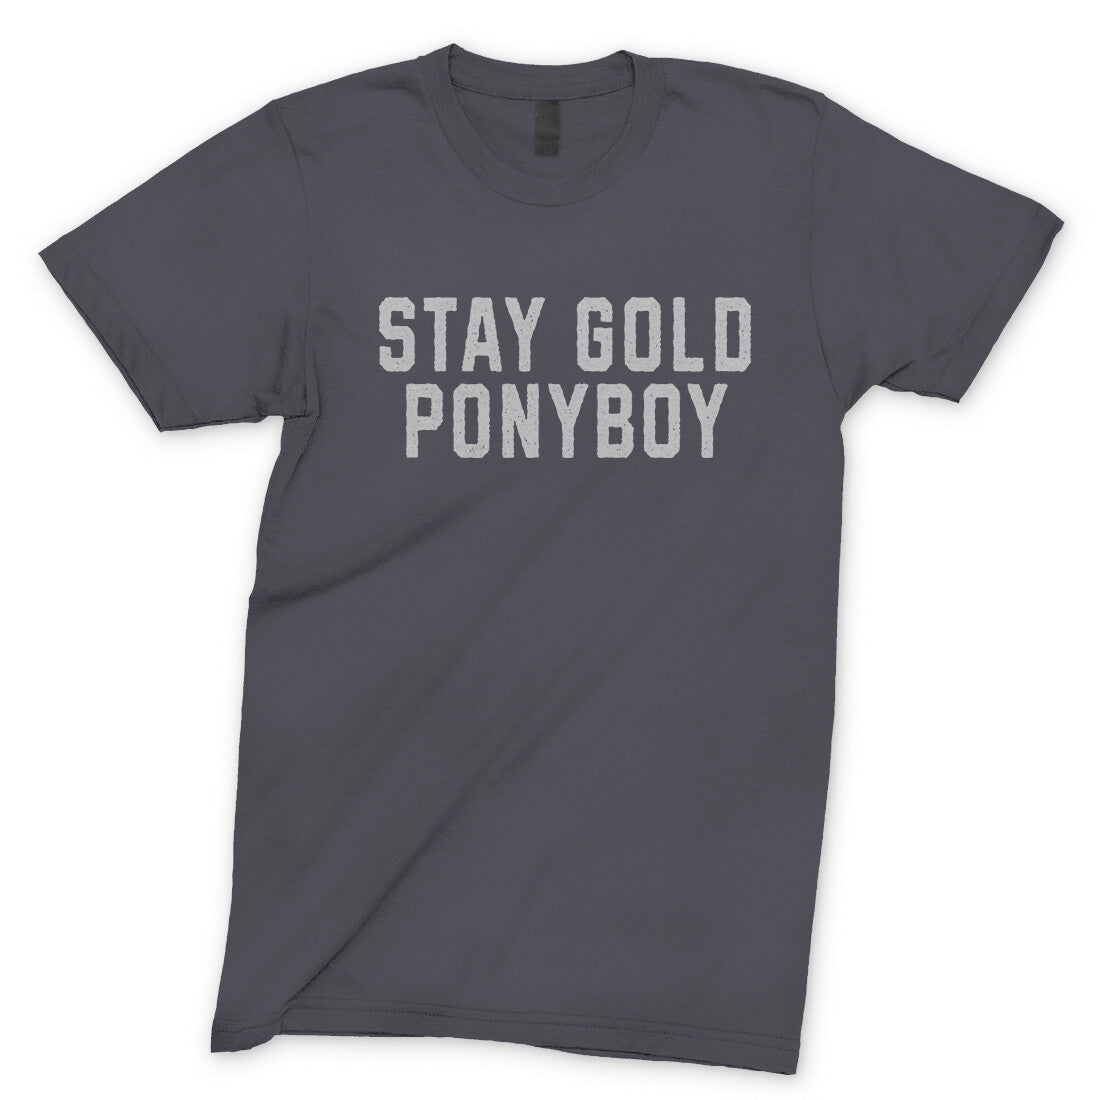 Stay Gold Ponyboy in Charcoal Color